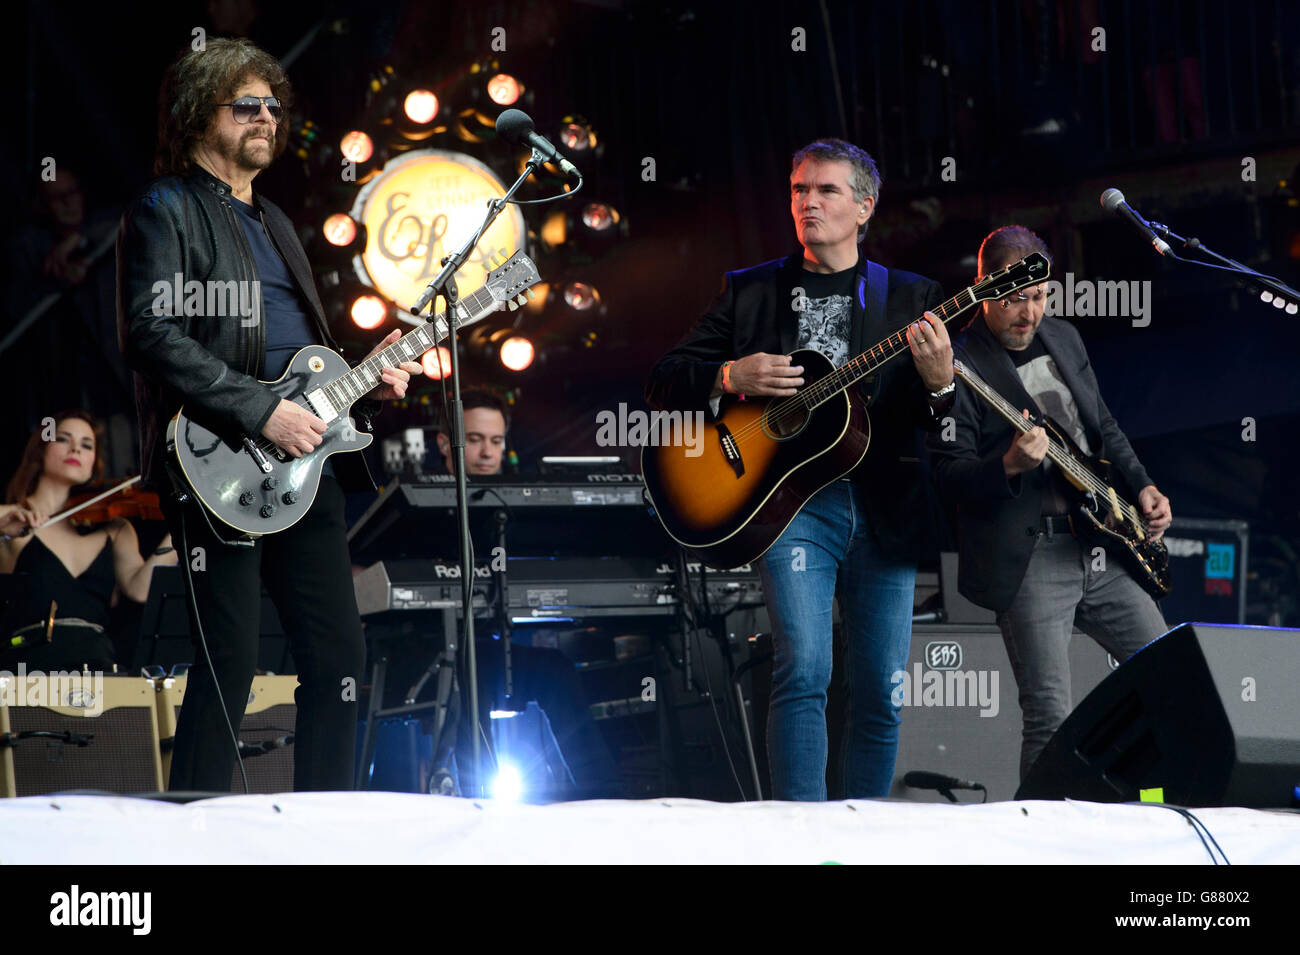 Jeff Lynne from band Electric Light Orchestra performs at the Glastonbury music festival Stock Photo